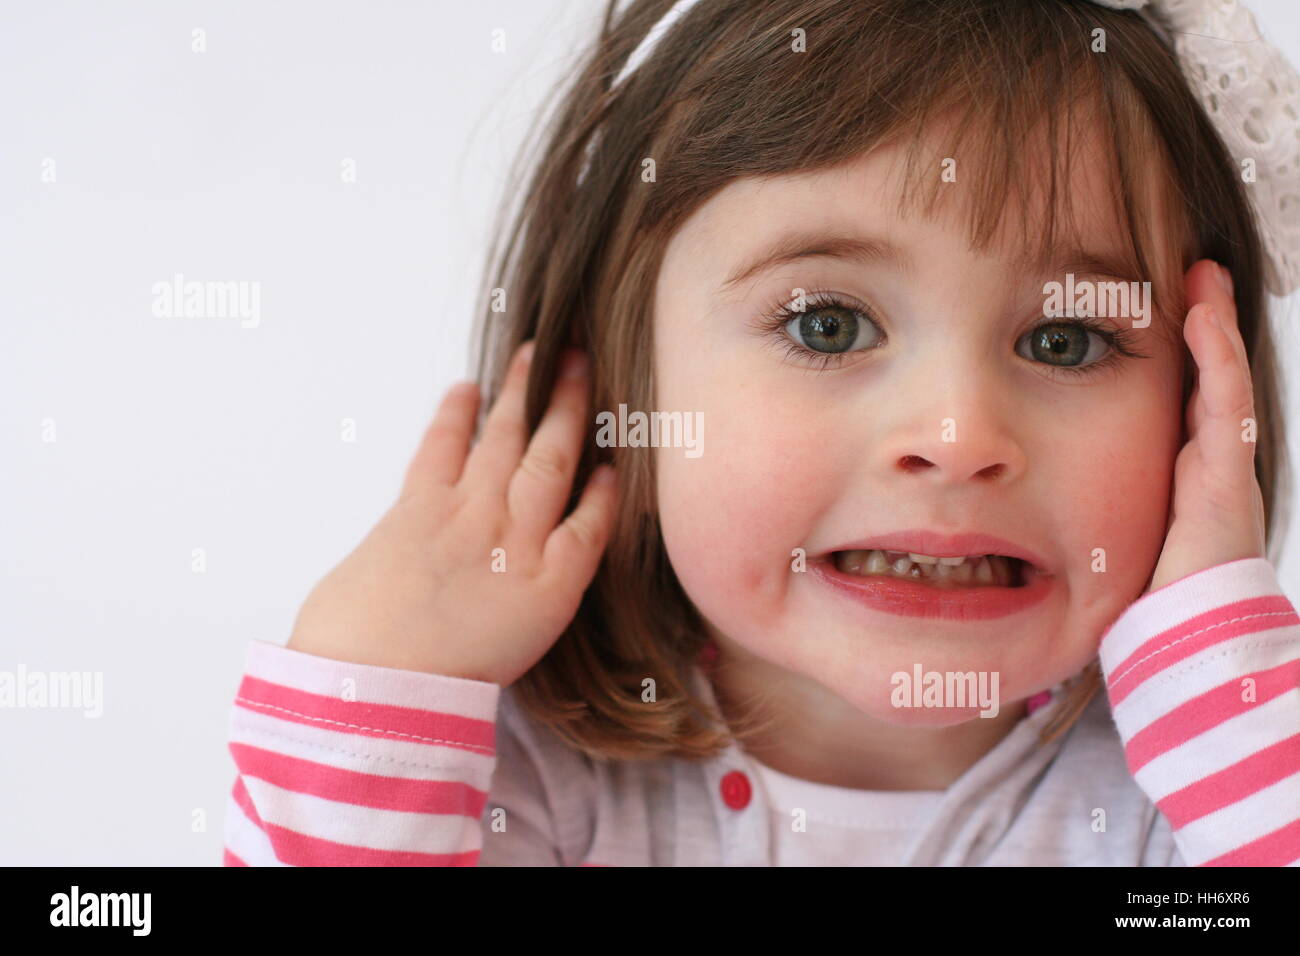 Little girl, child making a funny angry face, grinding / clenching her teeth kids faces, grimacing, innocent concept Stock Photo